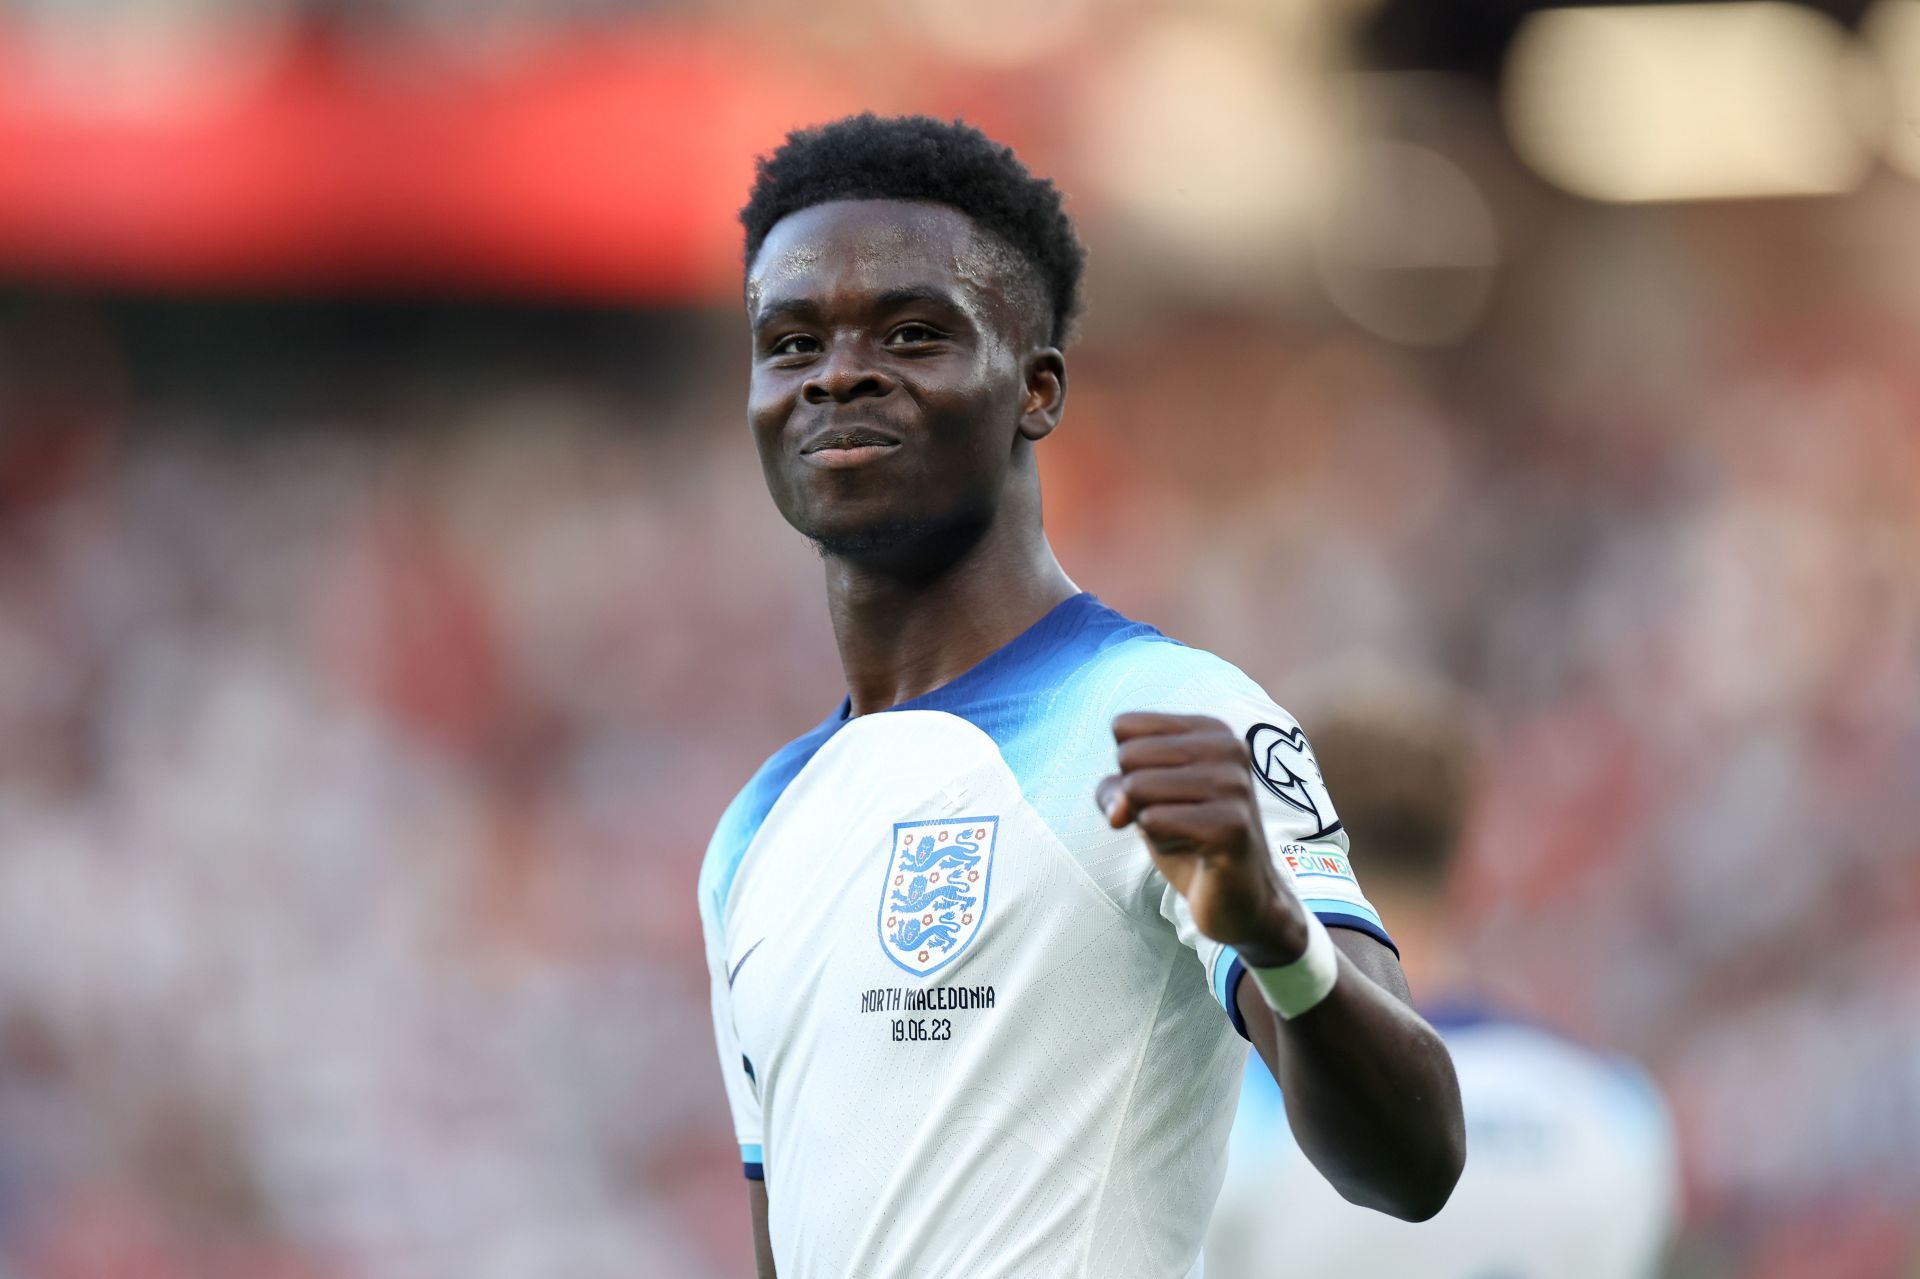 Saka scored a superb hat-trick for the Three Lions.